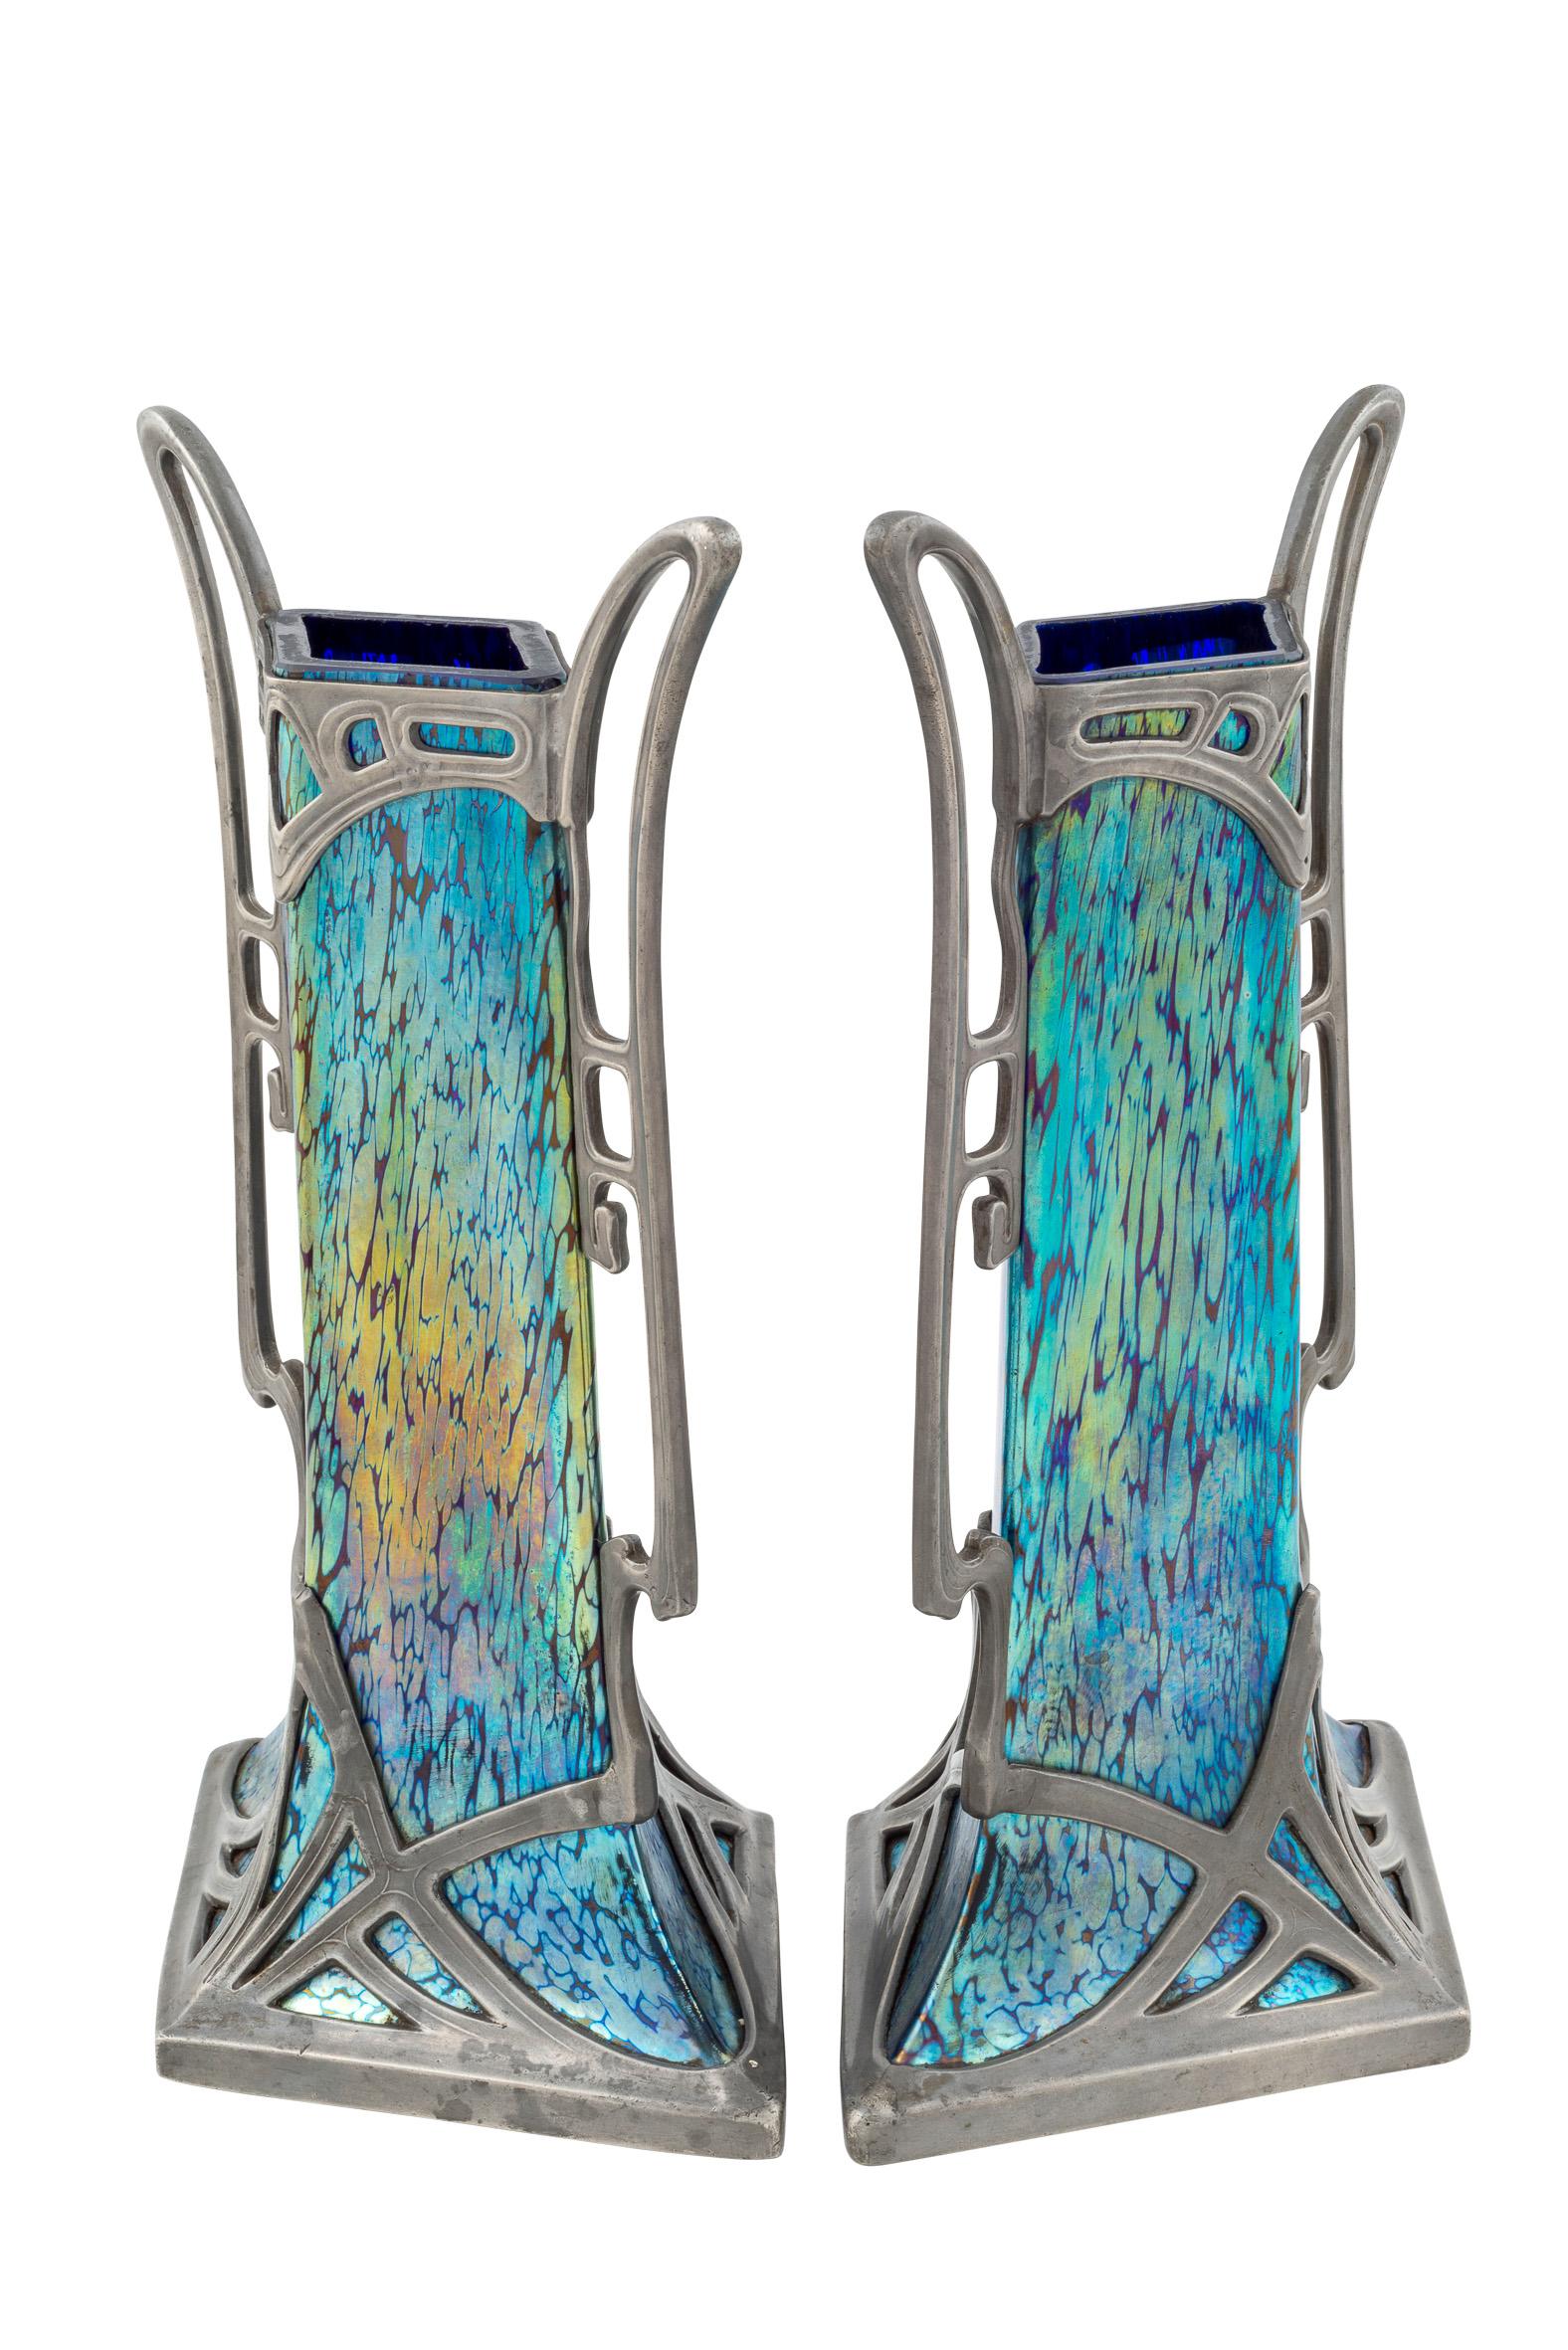 Austrian Jugendstil pair of glass vases blue with Tin Mounting from Arndt & Marcus Berlin circa 1902 Loetz Cobalt Papillon Decoration 

This pair of vases with the Cobalt Papillon decoration is an outstanding example of the incredible range of